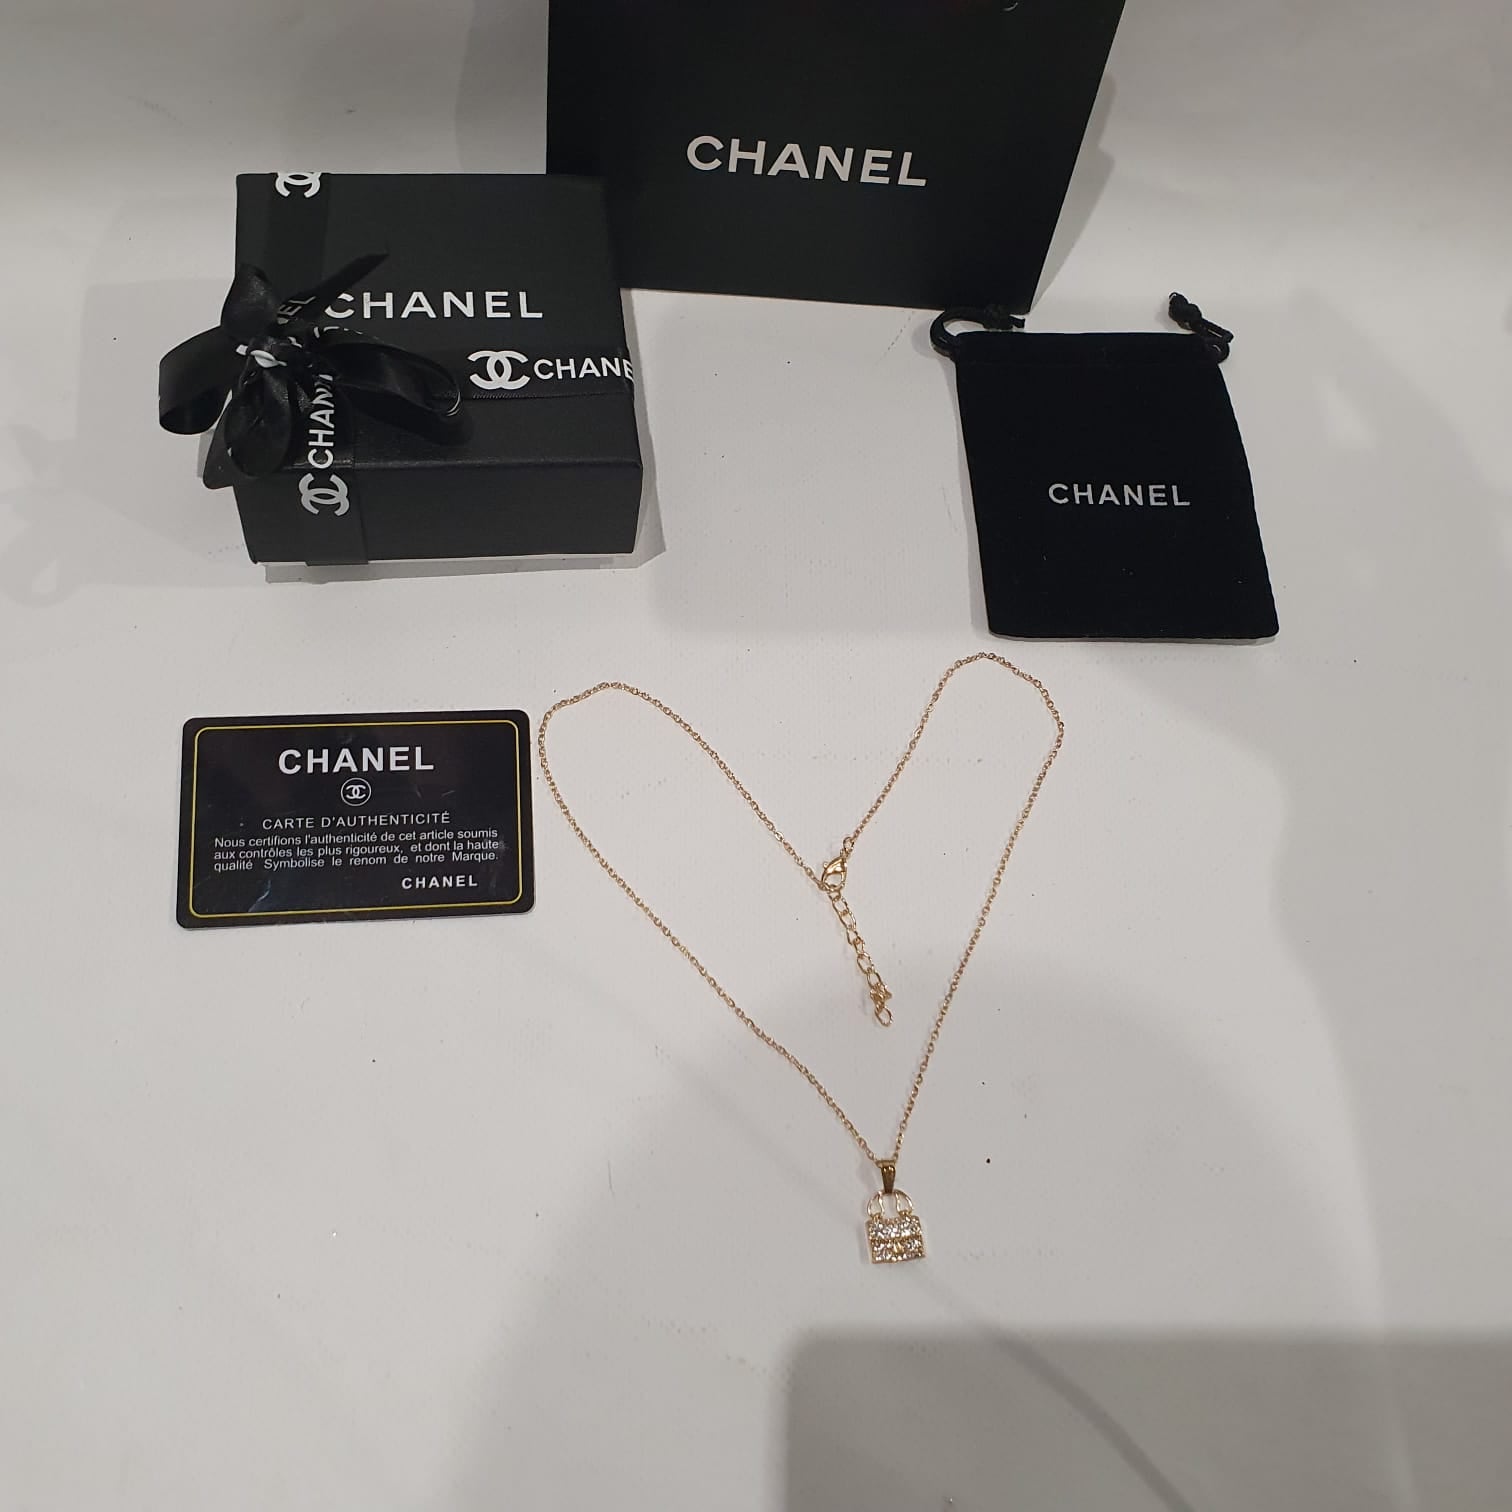 Chanel Necklace and Earrings